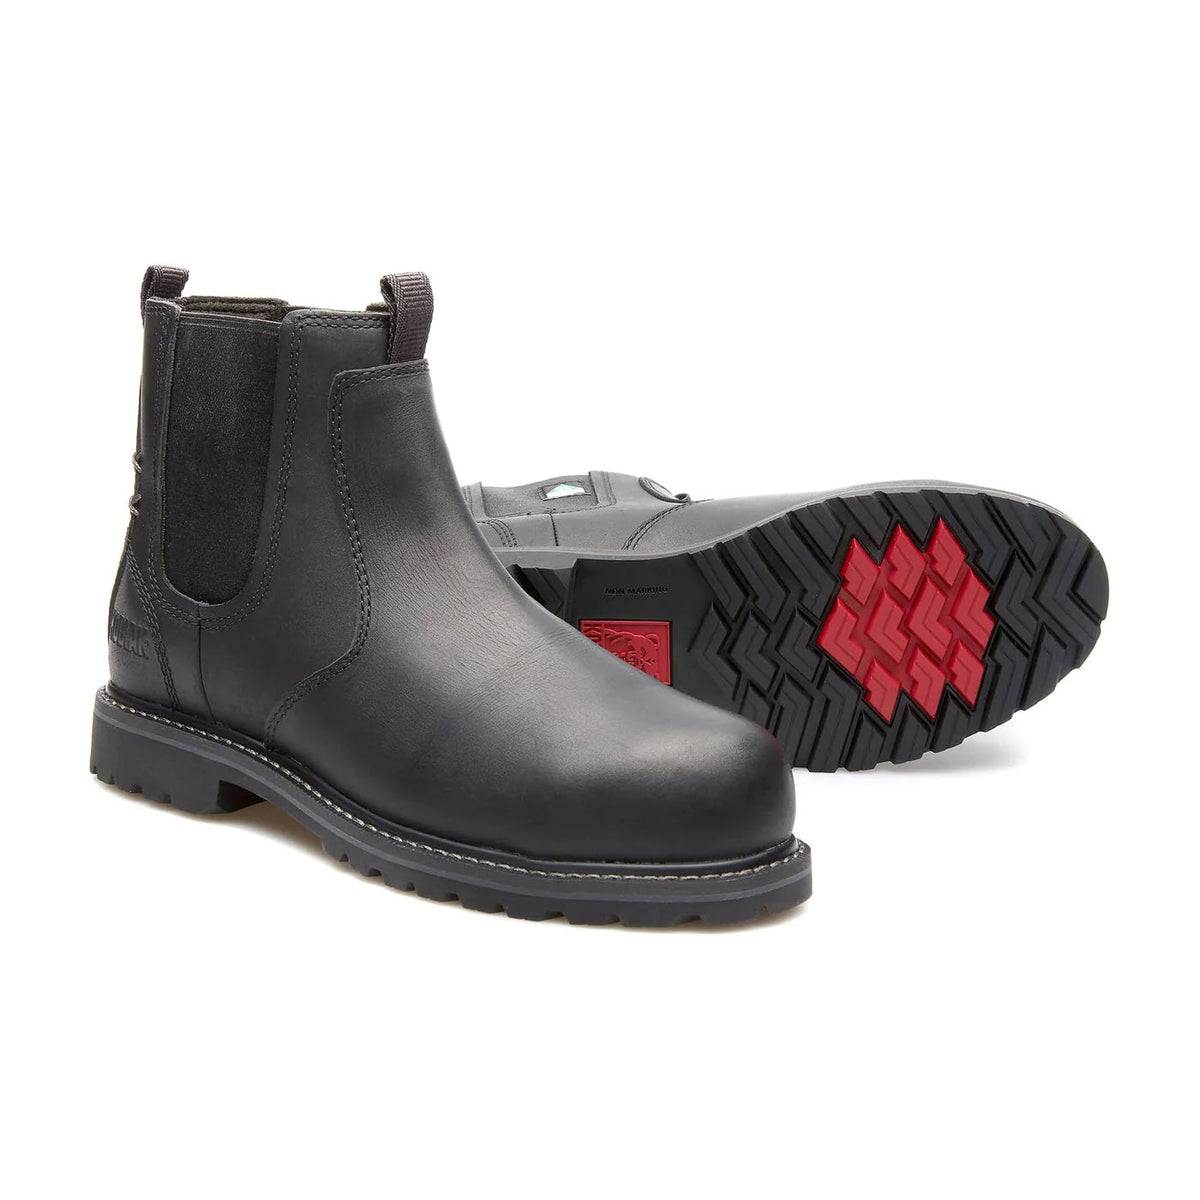 A pair of Kodiak Bralorne Chelsea black composite toe boots with elastic side panels and a distinctive red and black tread pattern on the sole, displayed on a white background.